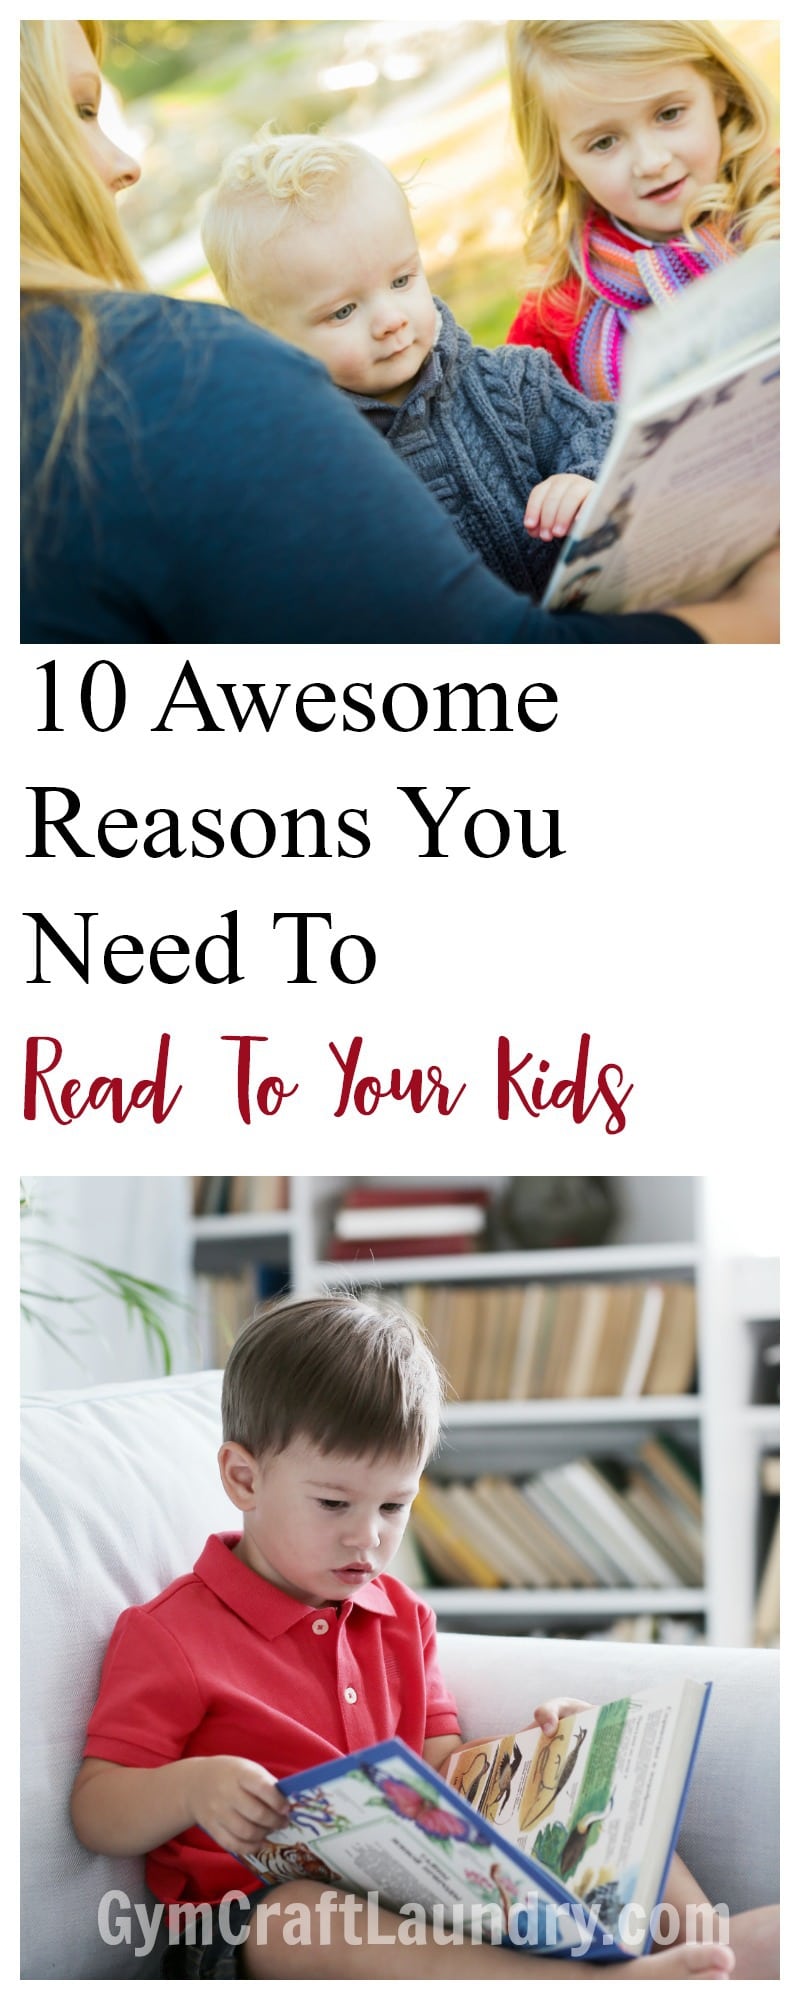 10 Awesome Reasons You Need To Read To Your Kids